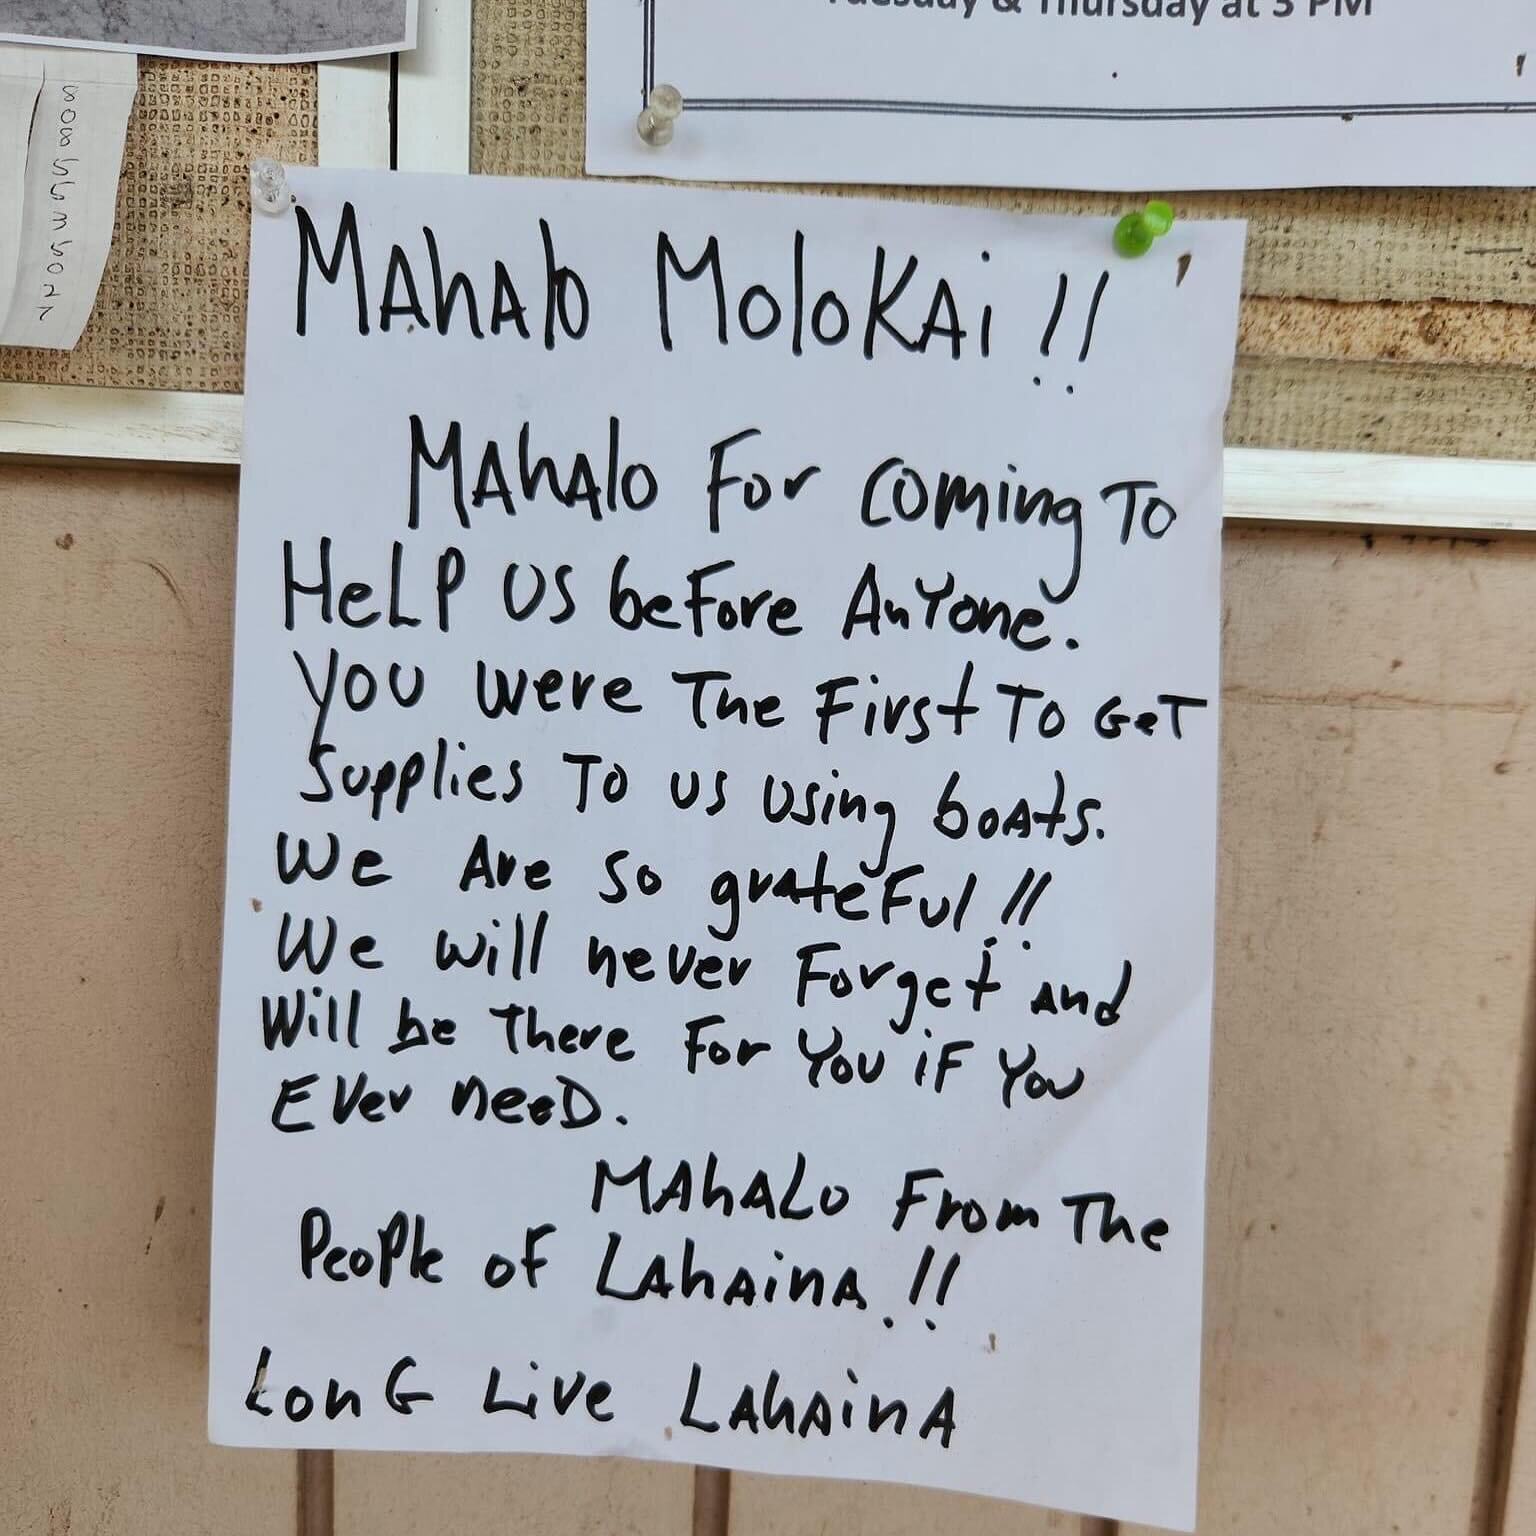 &ldquo;I was on Molokai today and saw this on the community bulletin board.  Great support from neighbor islands.&rdquo; Cliff Fulton 

Sharing a post seen in Lāhainā Remembered on FB. We &hearts;️ you Lāhainā. Wē are still here for you.

If ʻohana w